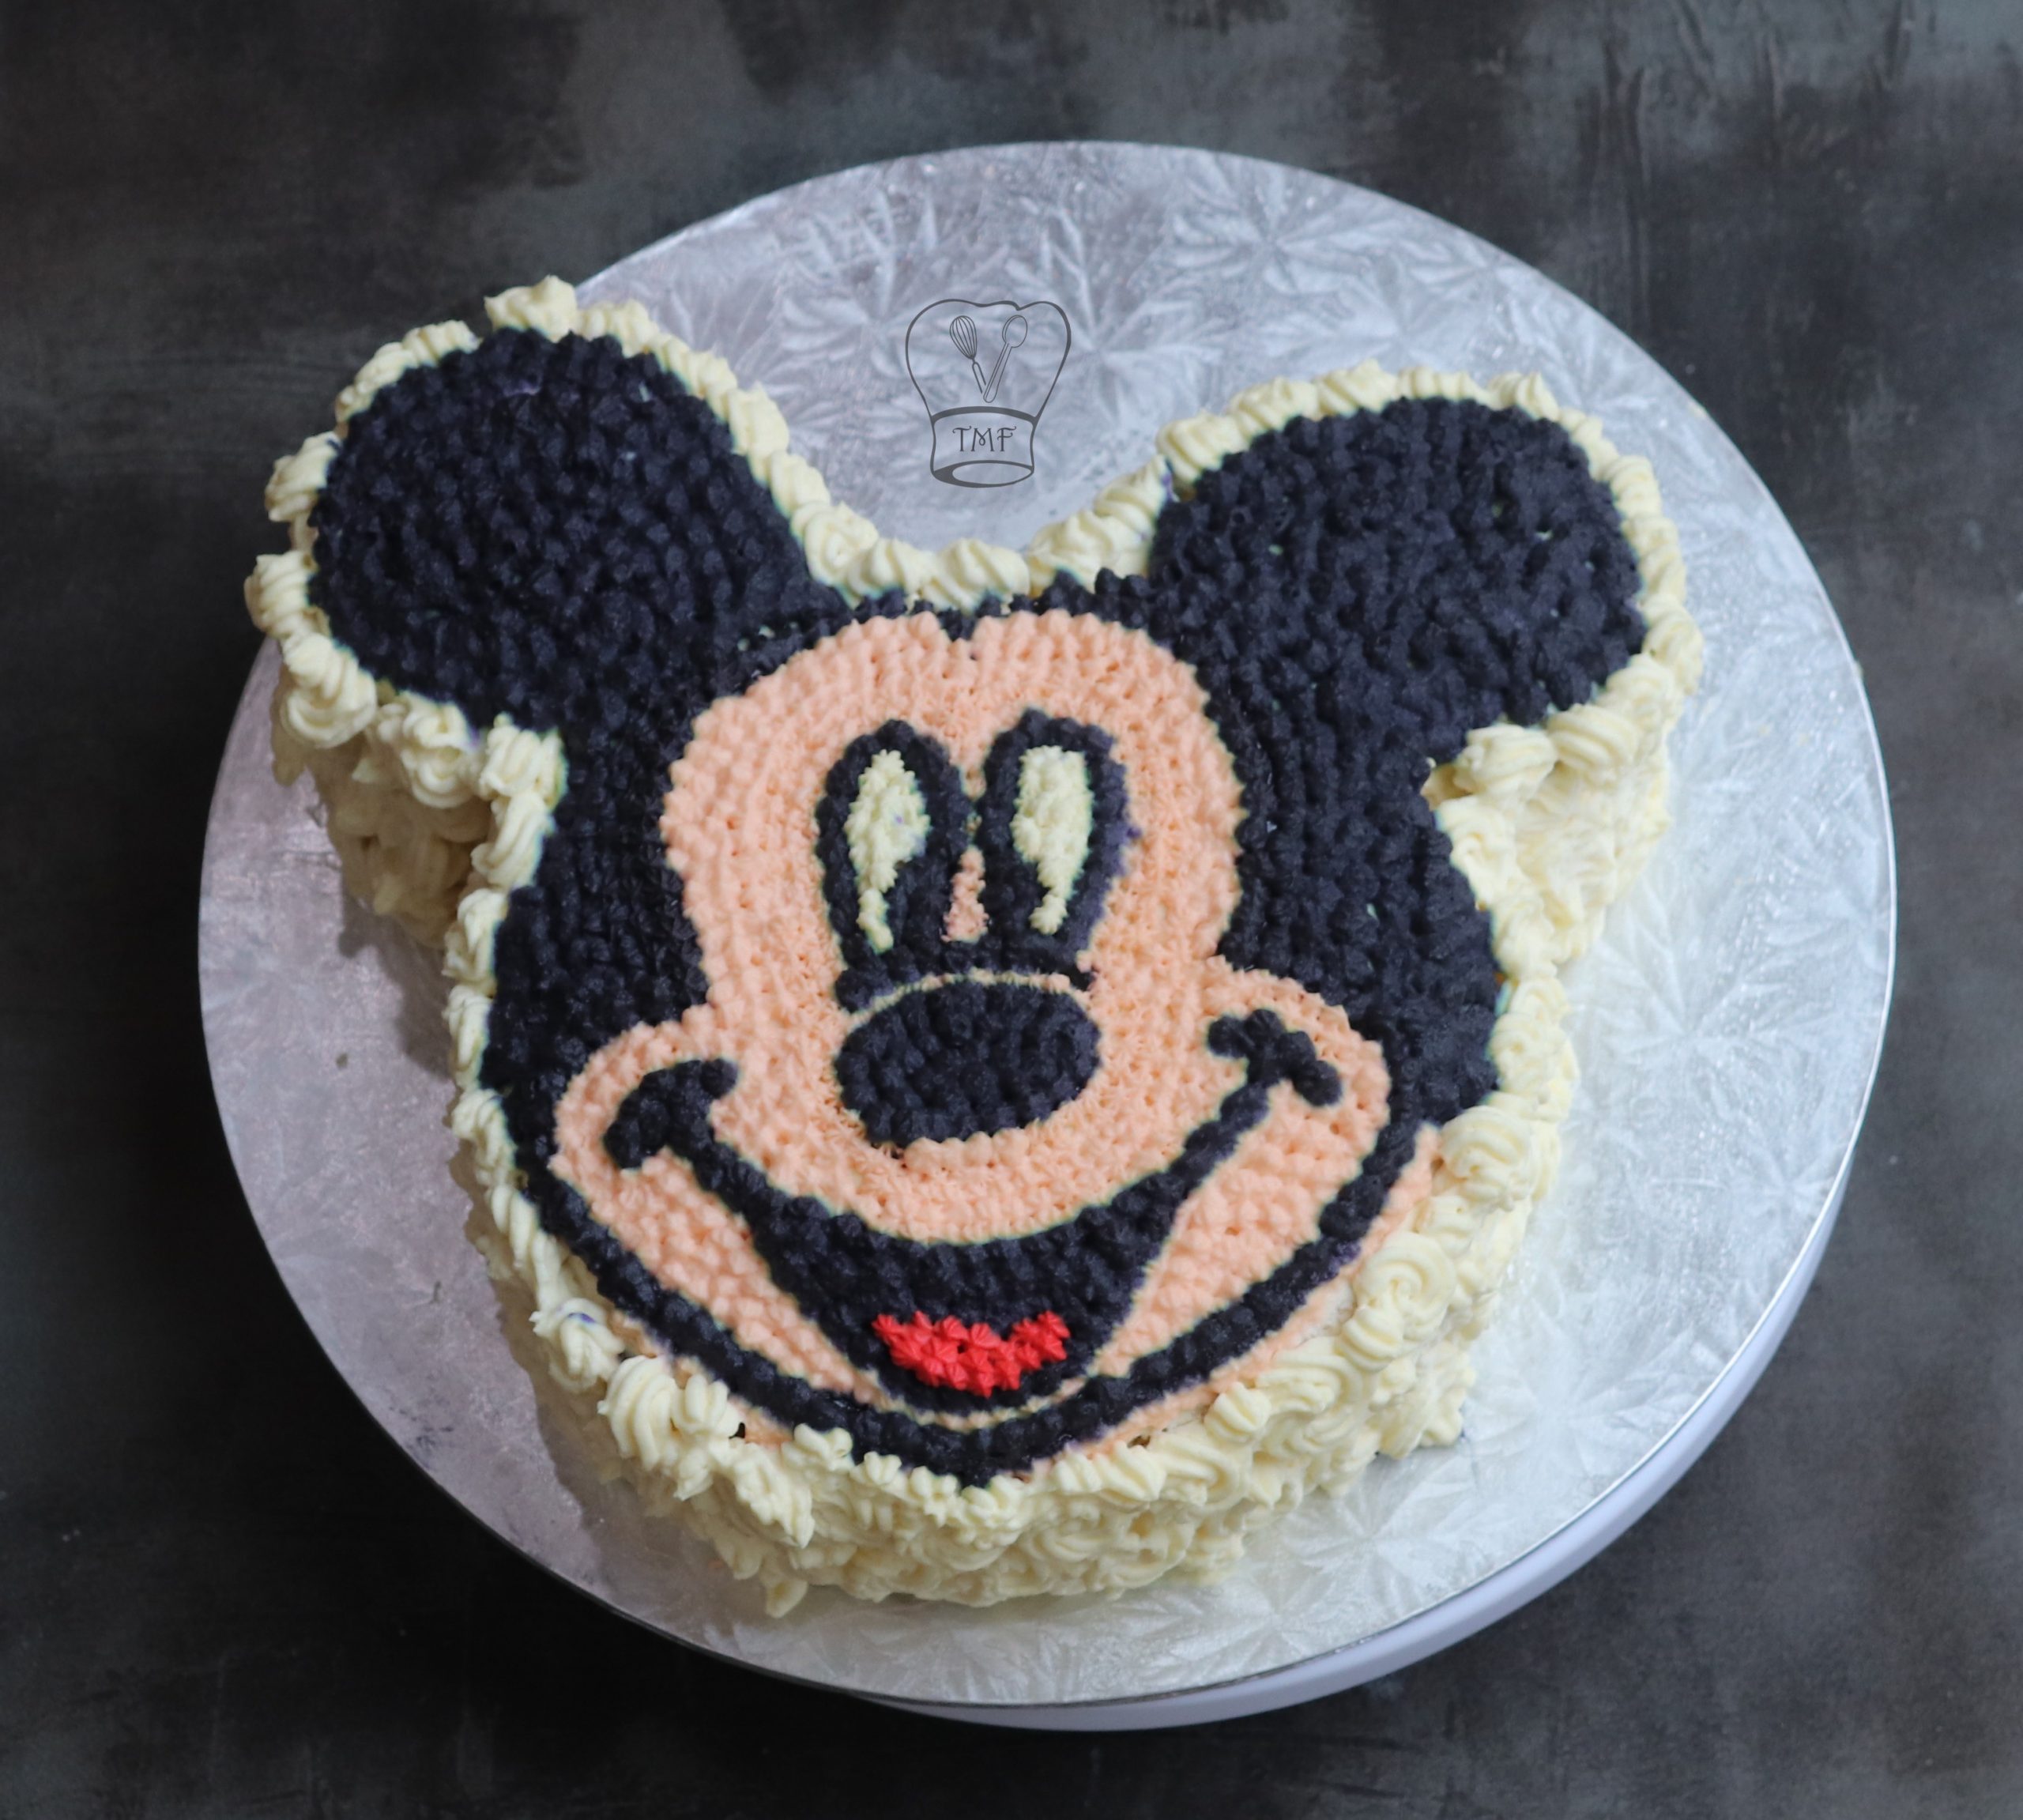 Mickey Mouse Ice Cream Cake | Mickey Mouse Ice Cream Cake for kids